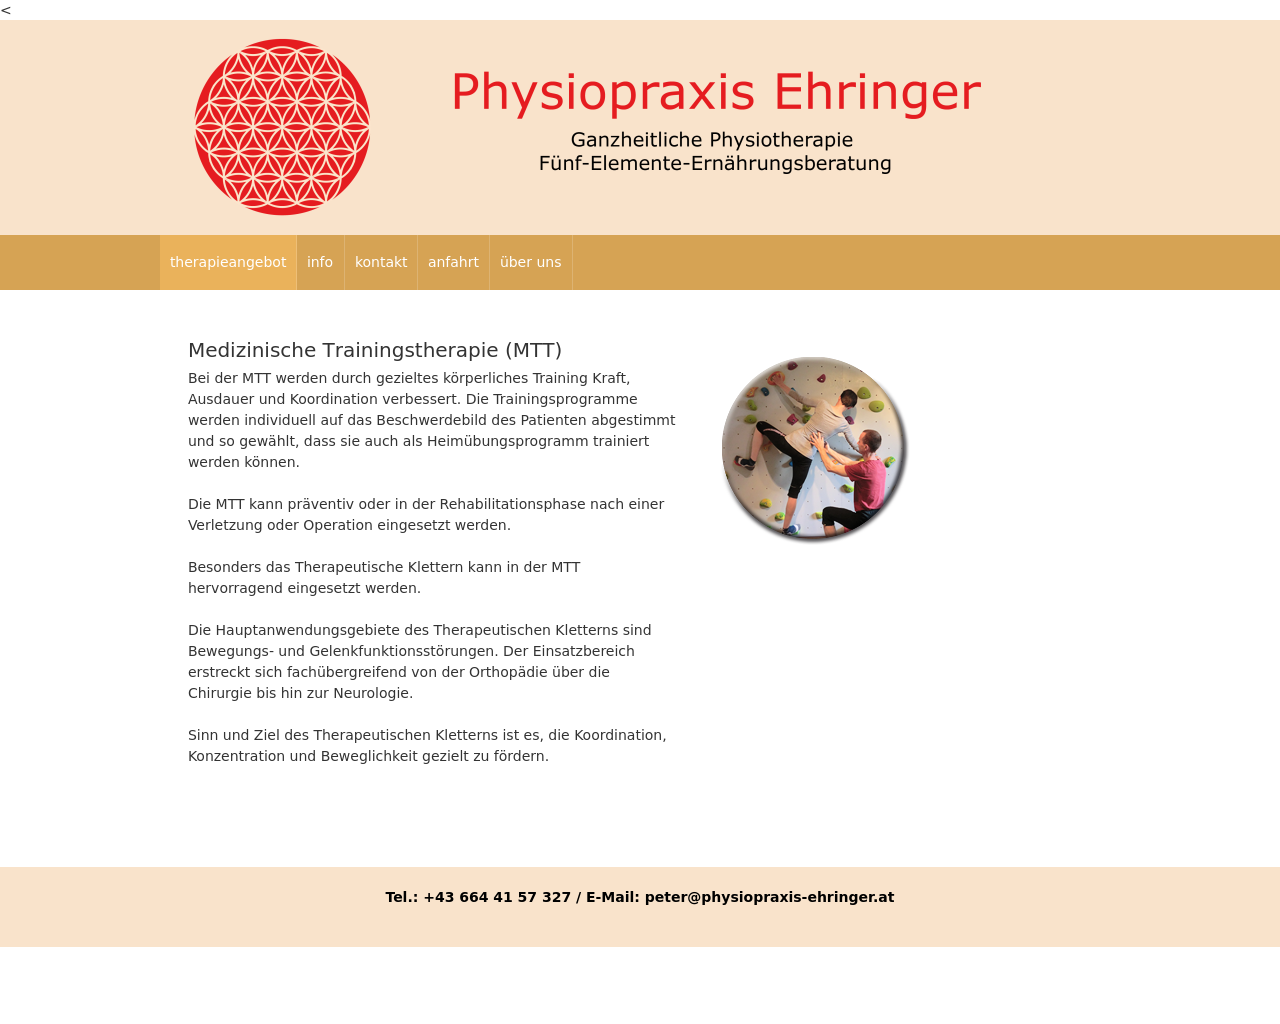 Bild Website physiopraxis-ehringer.at in 1280x1024